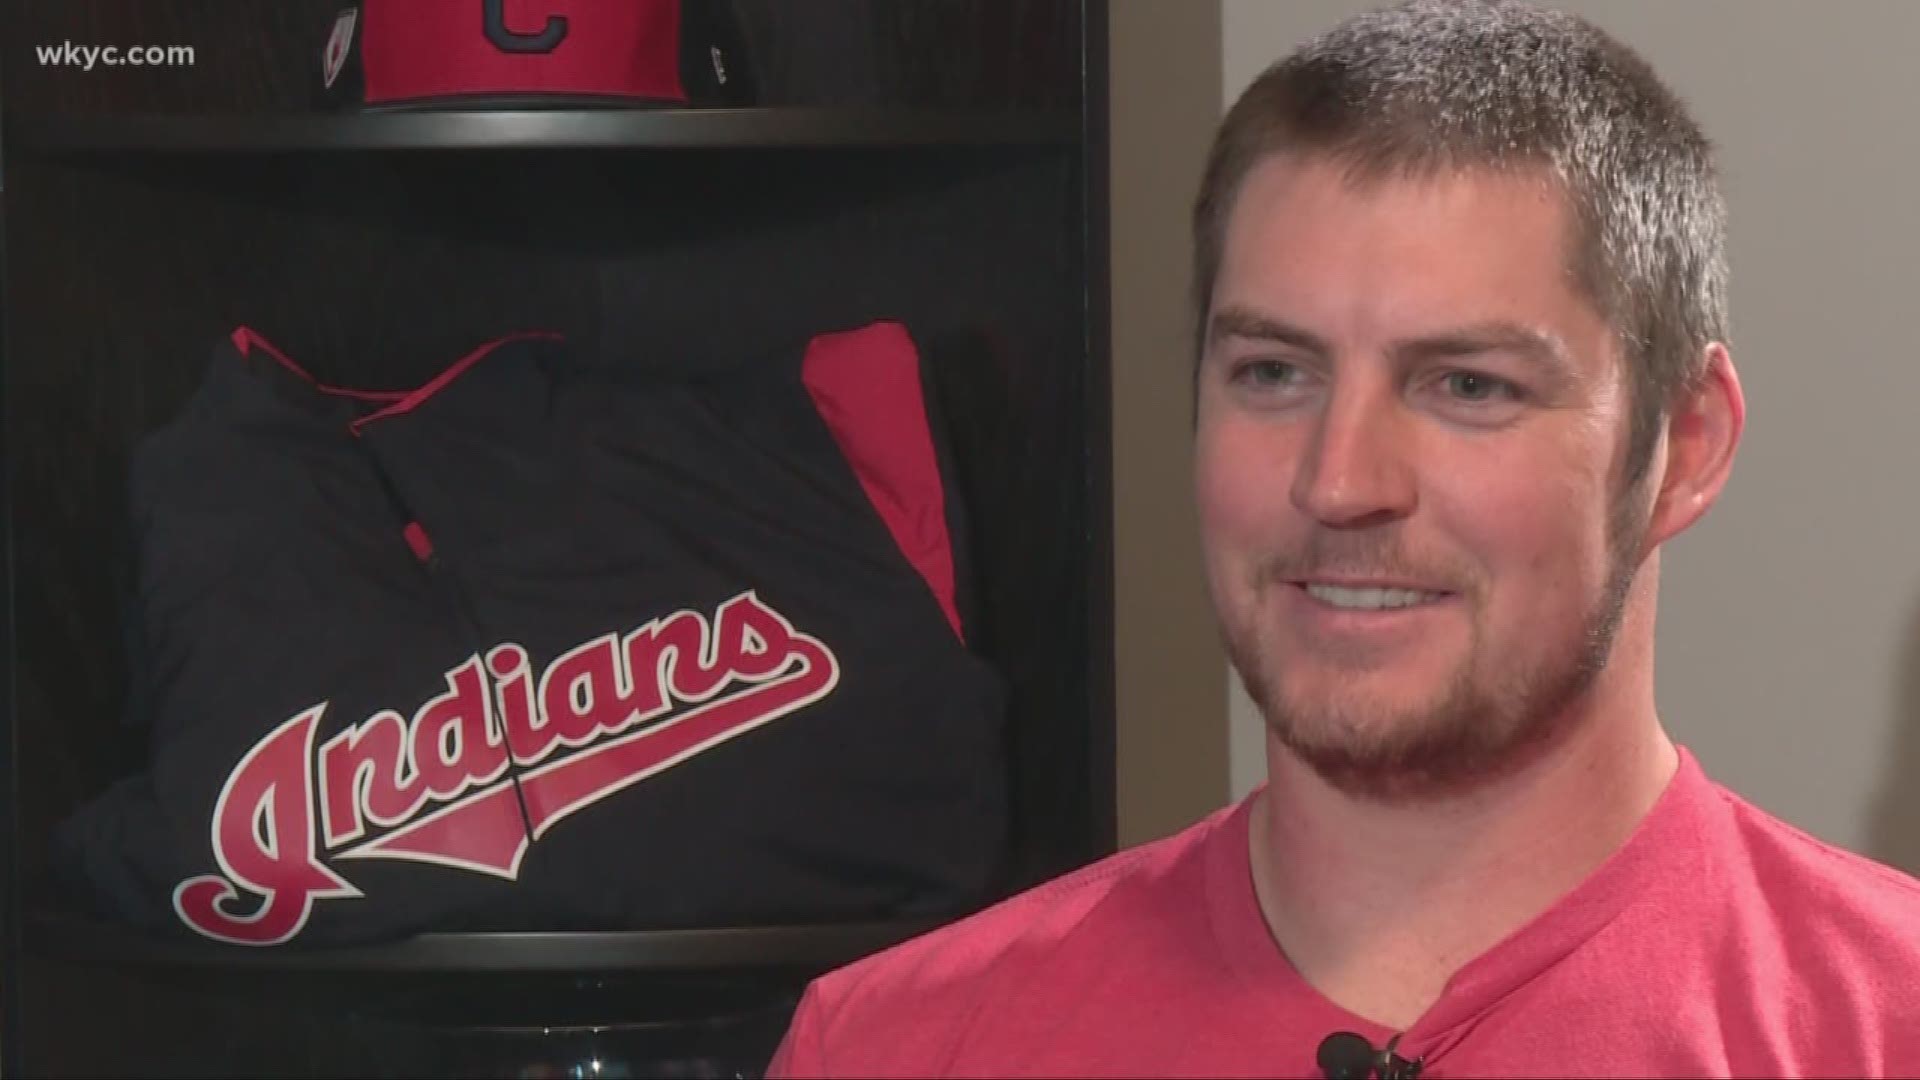 July 31, 2019: Trevor Bauer is no longer a member of the Cleveland Indians. His trade has quickly taken over social media with strong reactions from baseball fans.